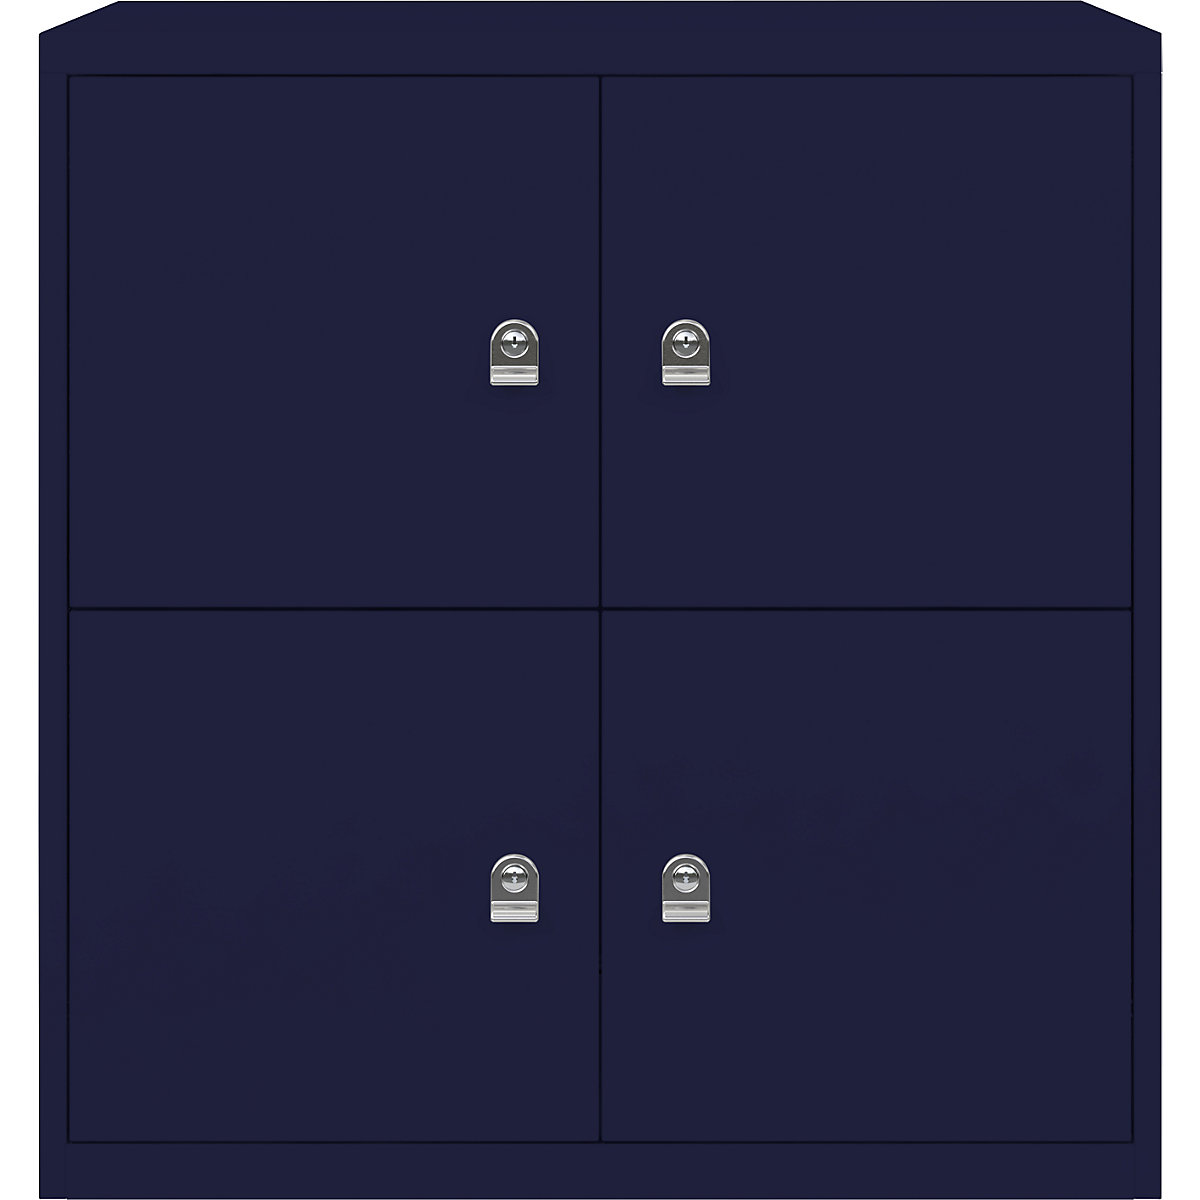 LateralFile™ lodge – BISLEY, with 4 lockable compartments, height 375 mm each, oxford blue